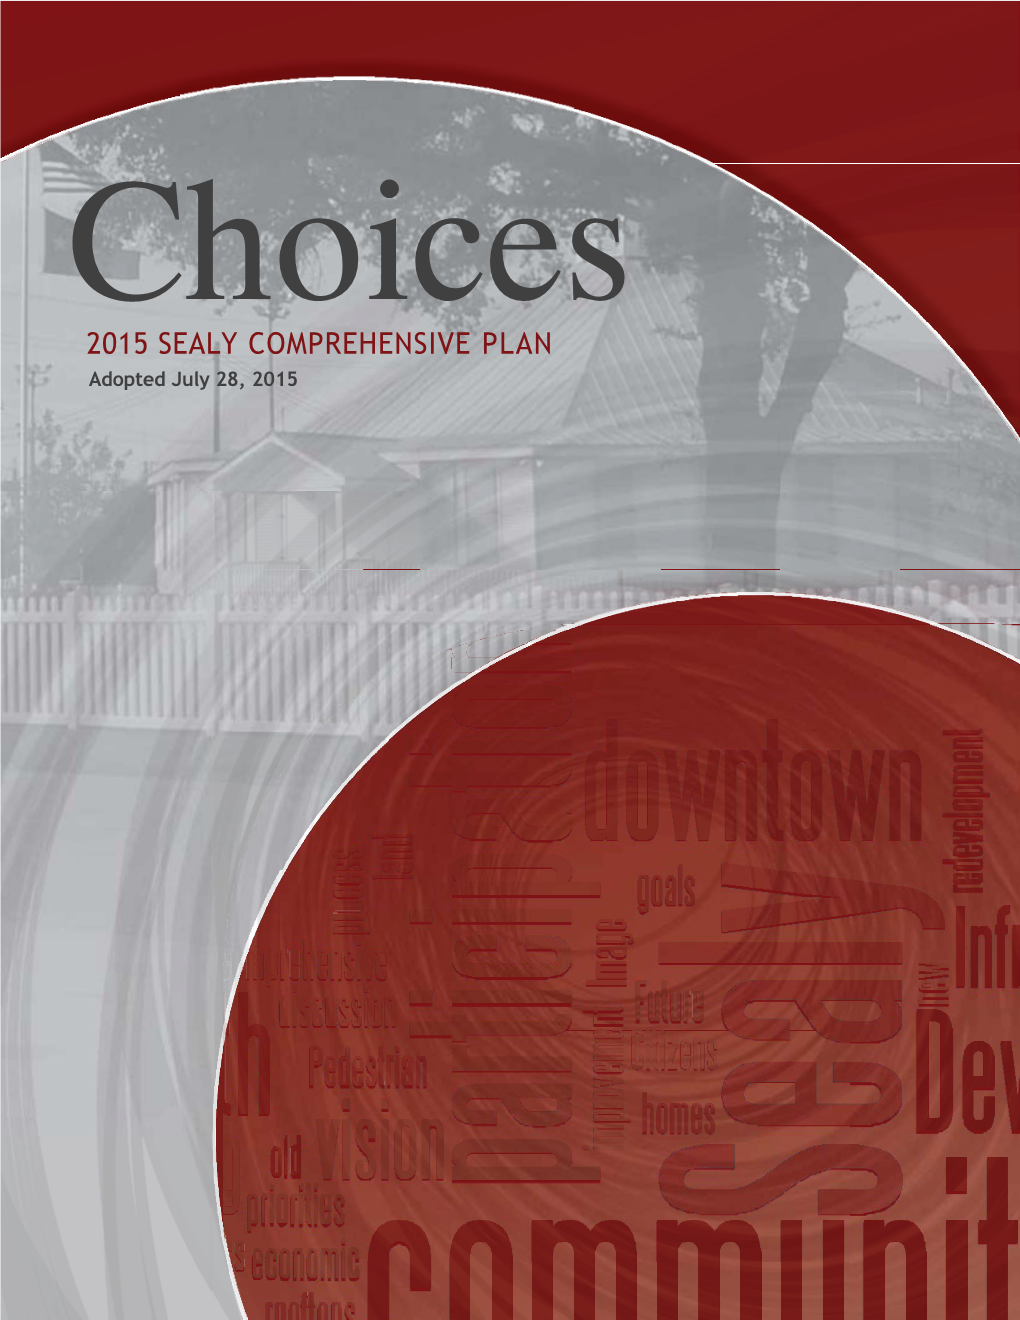 2015 SEALY COMPREHENSIVE PLAN Adopted July 28, 2015